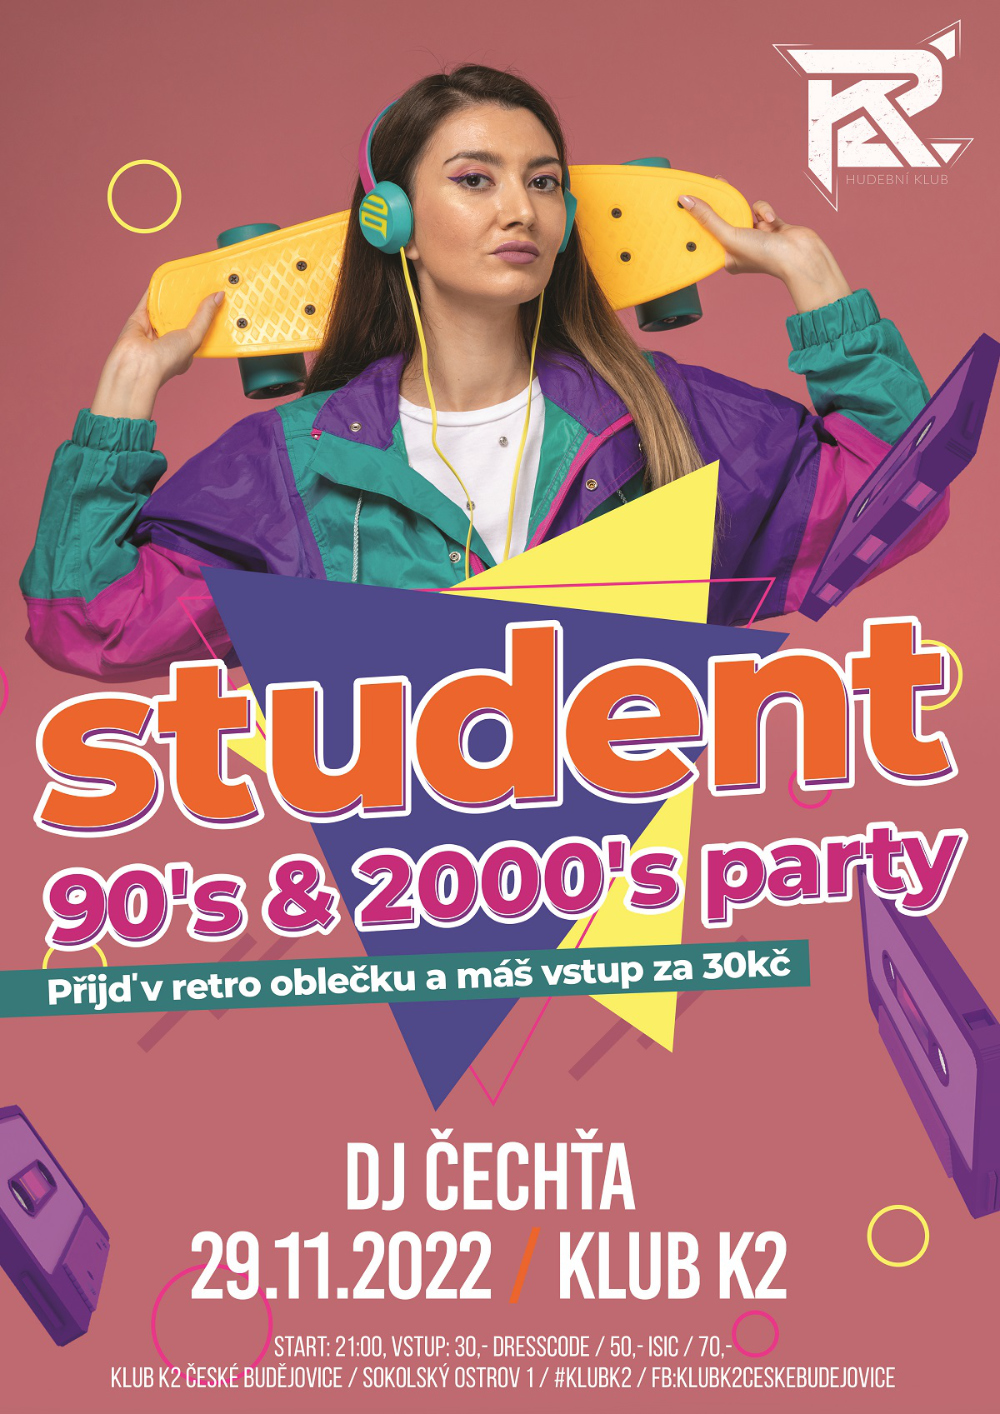 90's - 2000's student party